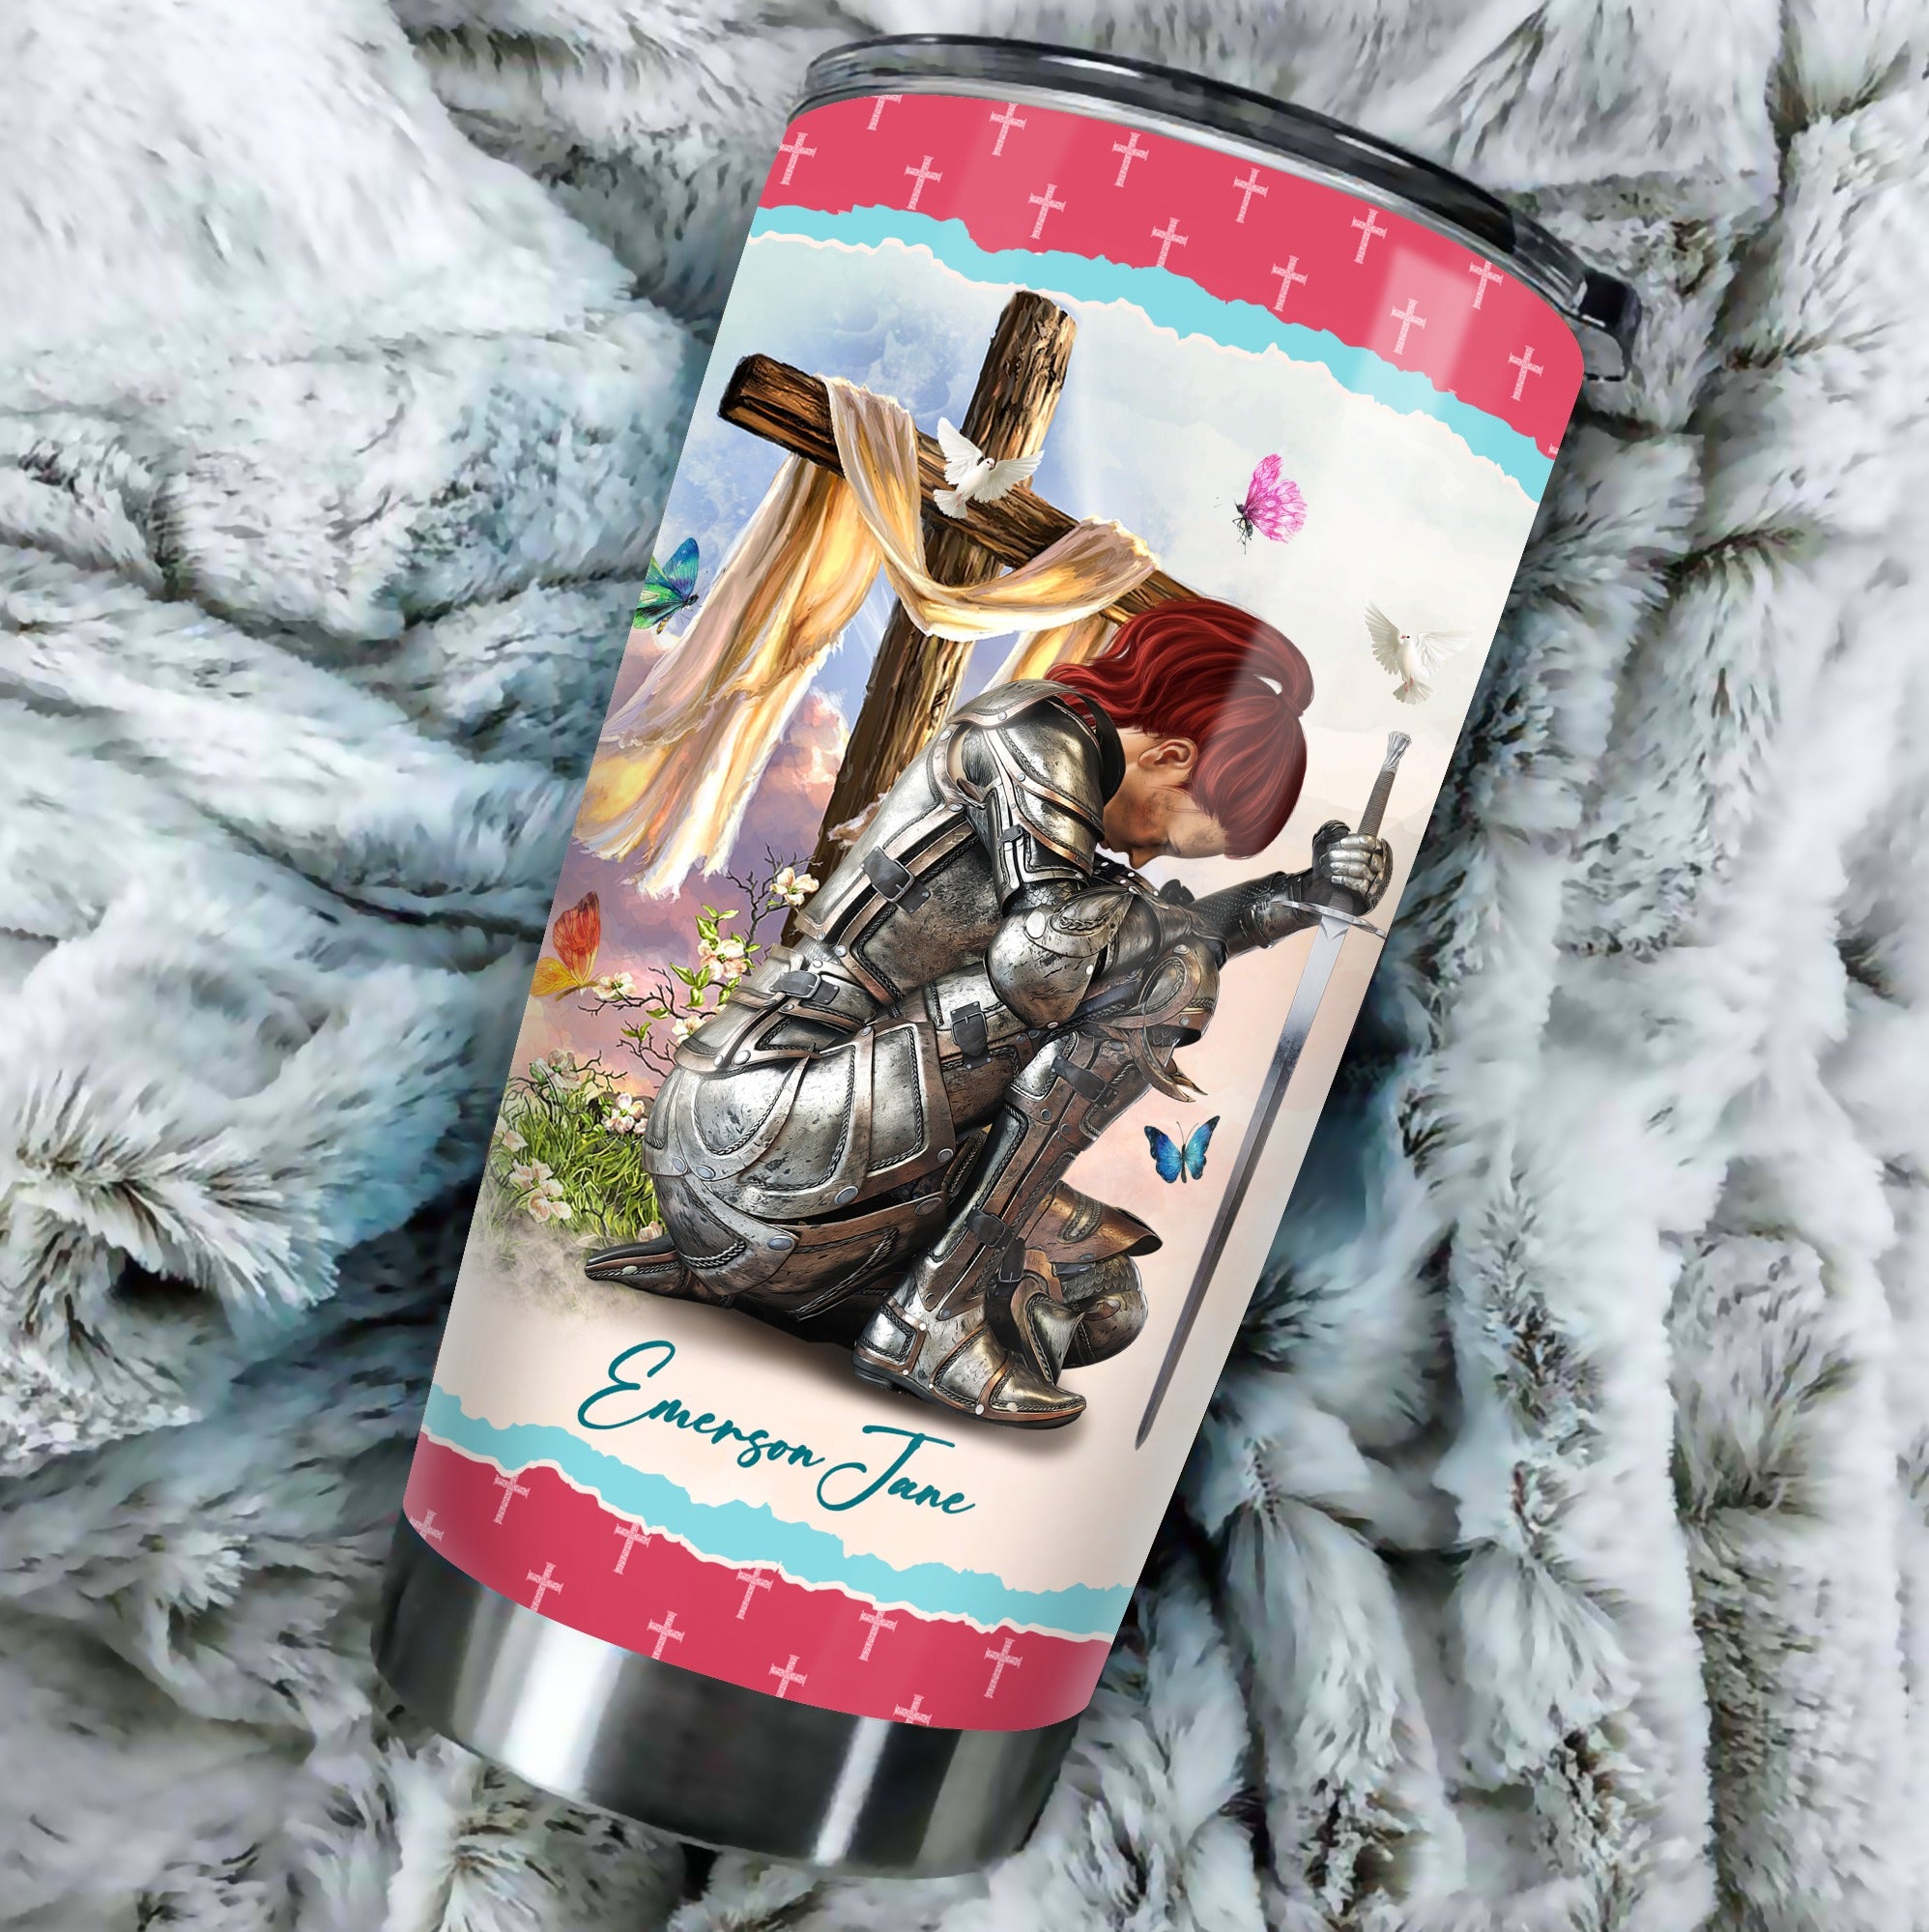 Personalized You Are Beautiful Victorious Enough Created Strong Amazing  4-in-1 Cooler Tumbler, Personalized Woman Warrior Of God Cool TumBler,  female warrior of god, praying woman warrior of god - Viralcitron